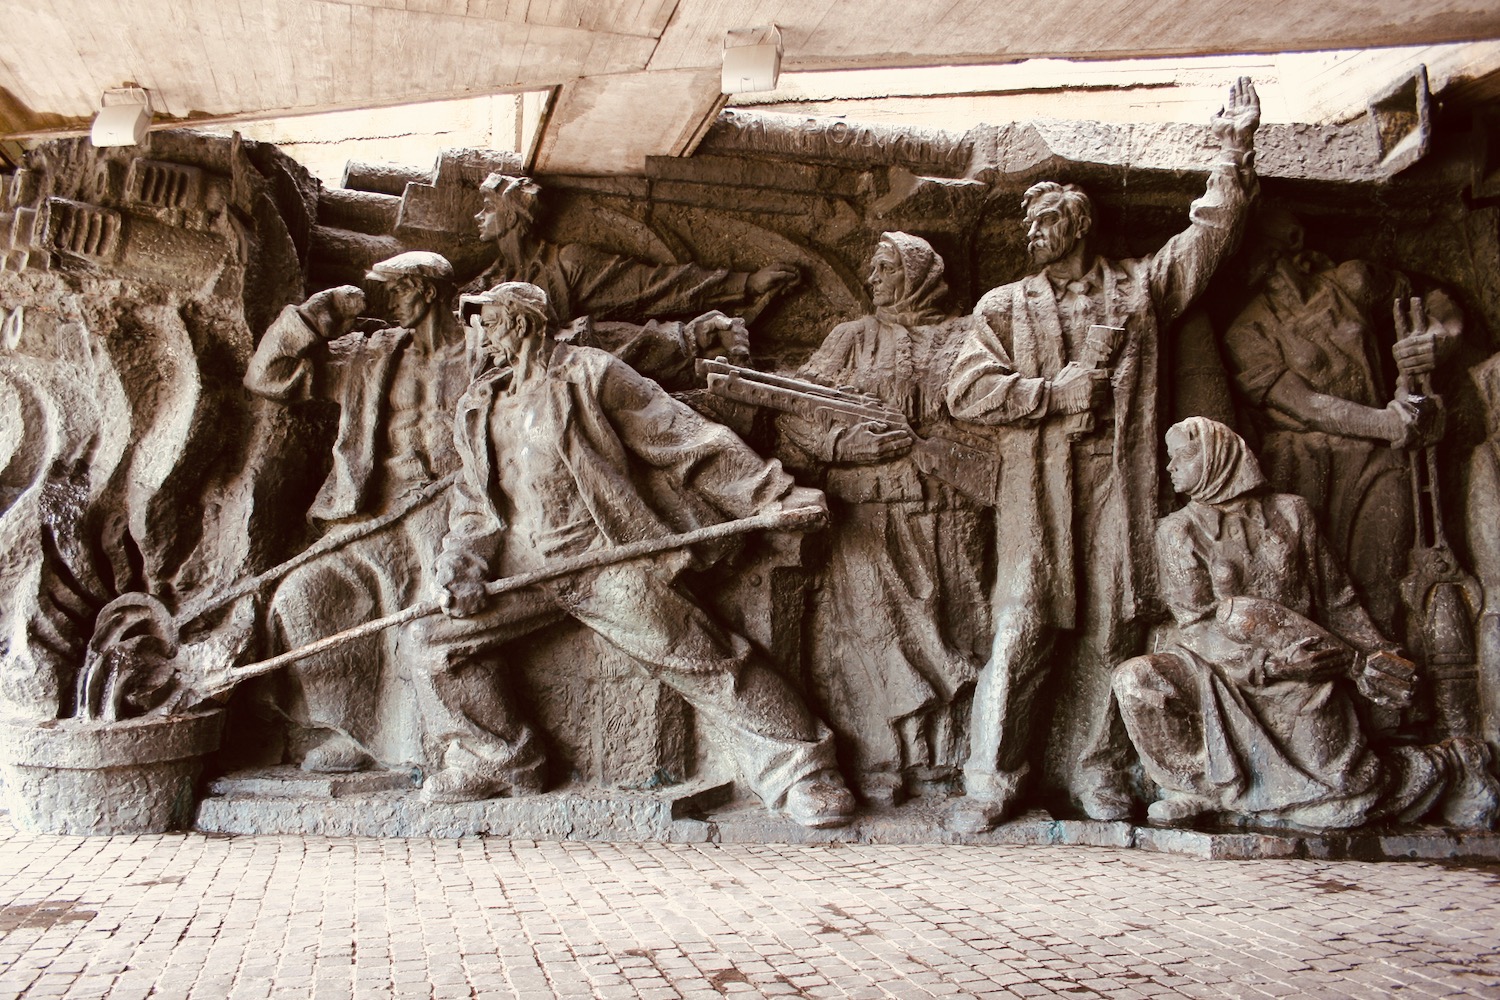 a stone sculpture of people holding guns